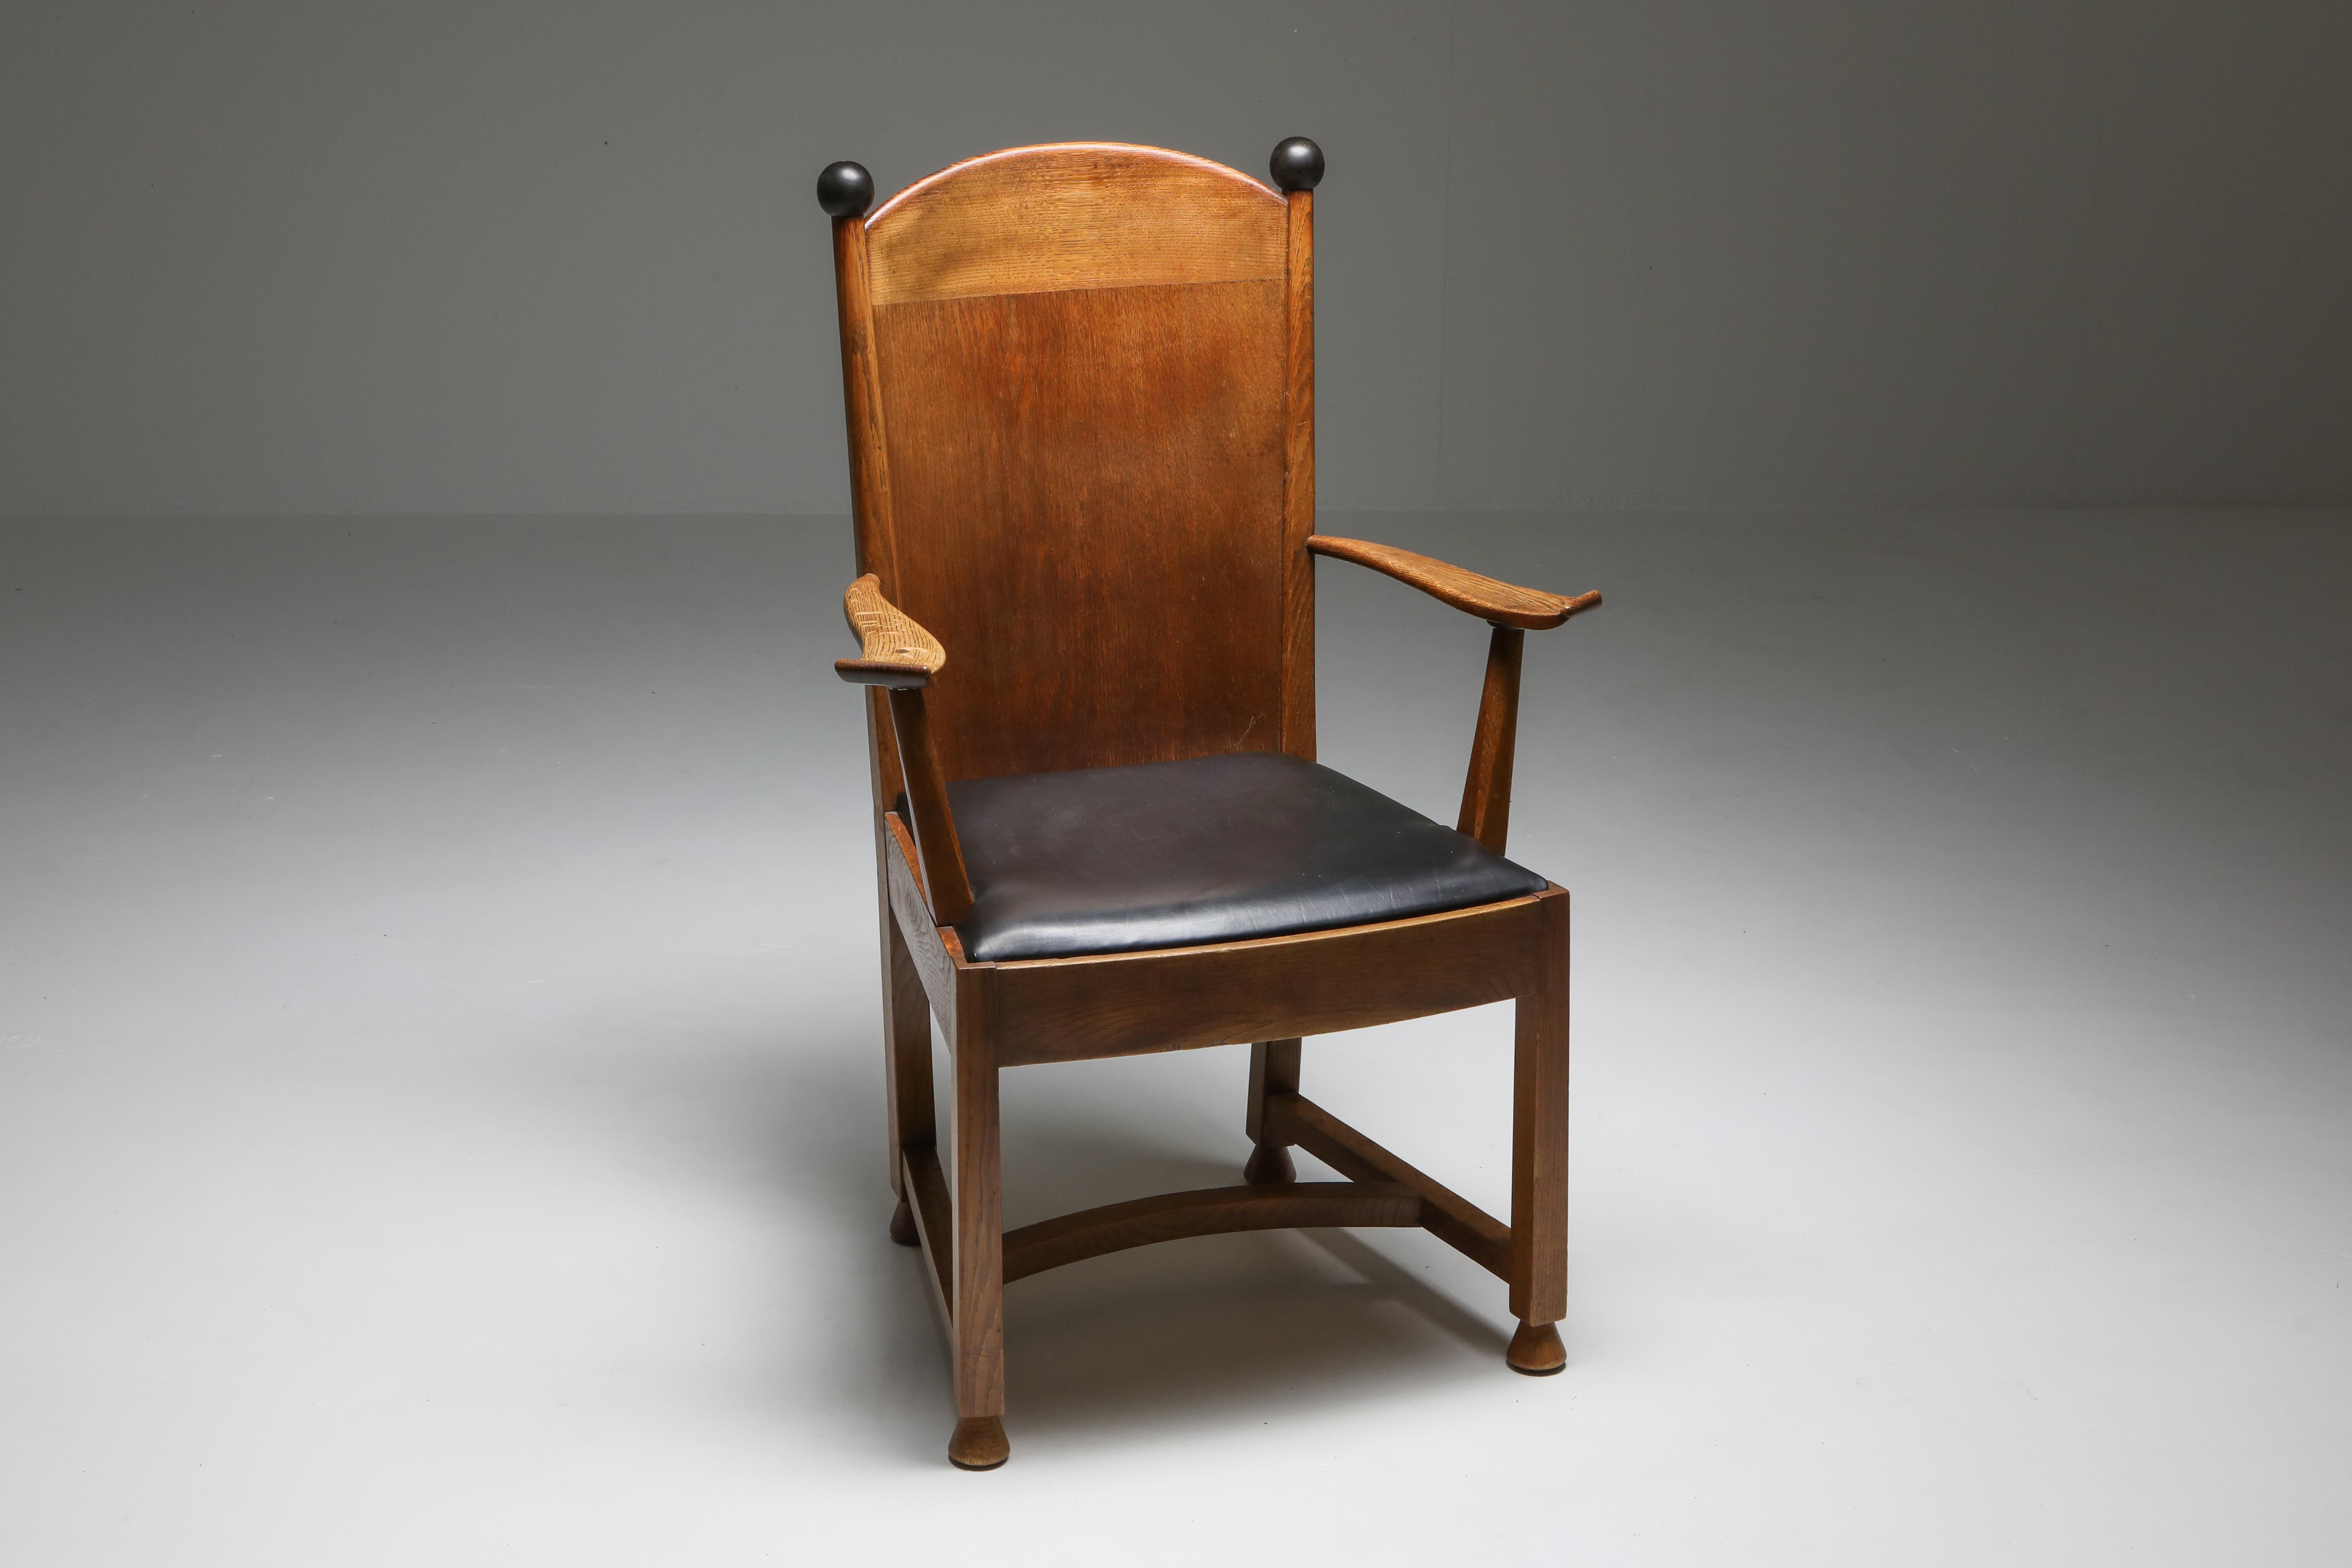 Early Modernist armchair, The Netherlands 1928, Metz & Co
oak and ebonized wood
Arts & Crafts era; Amsterdam school; Hague School
Provenance: from private collection Amsterdam.


 